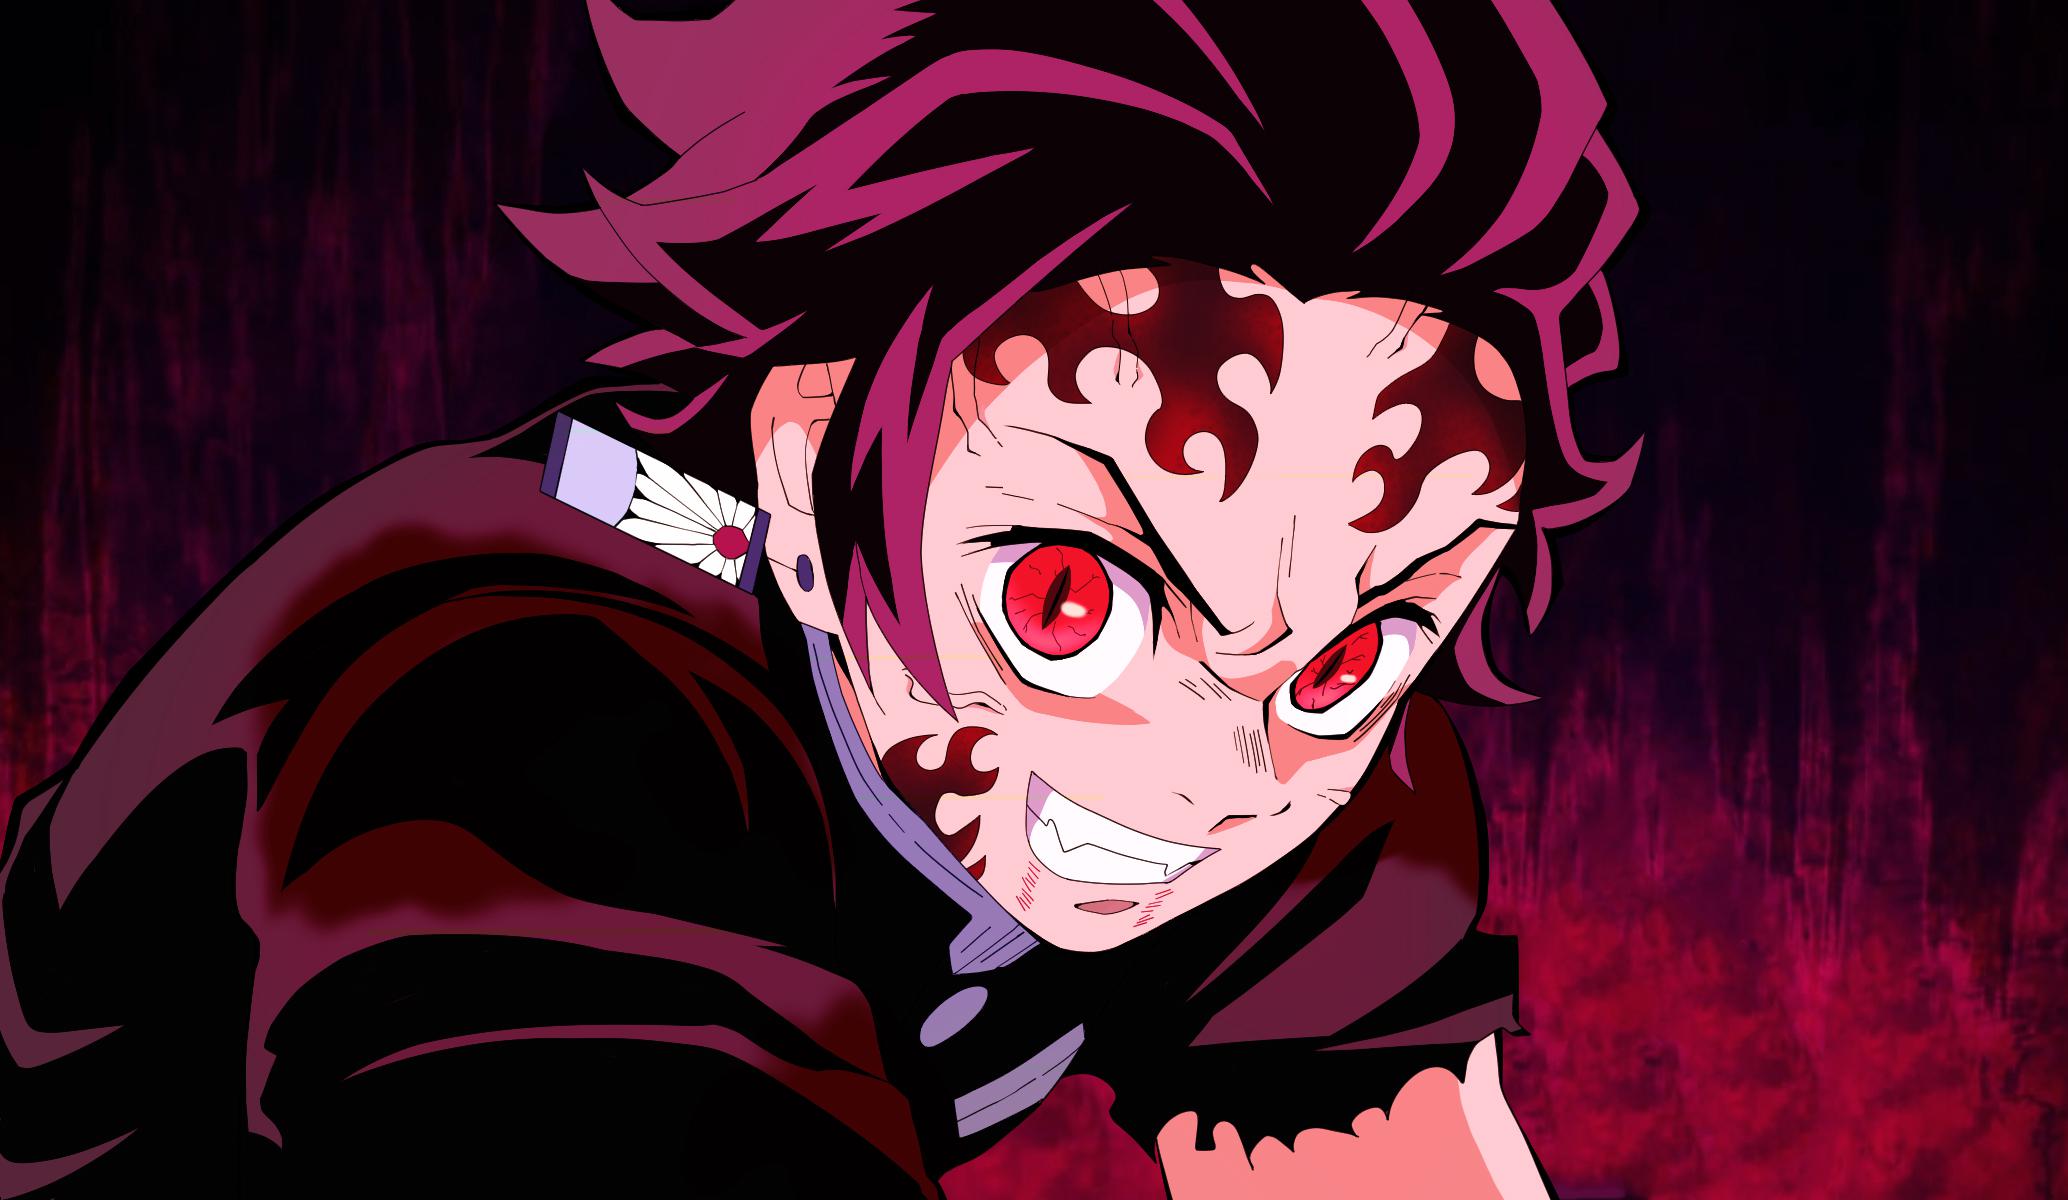 Demon Slayer Kimetsu no Yaiba Chapter 202 Raw Scans, Leaks, Spoilers Tanjiro gets a Cure for Stopping Demon Transformation